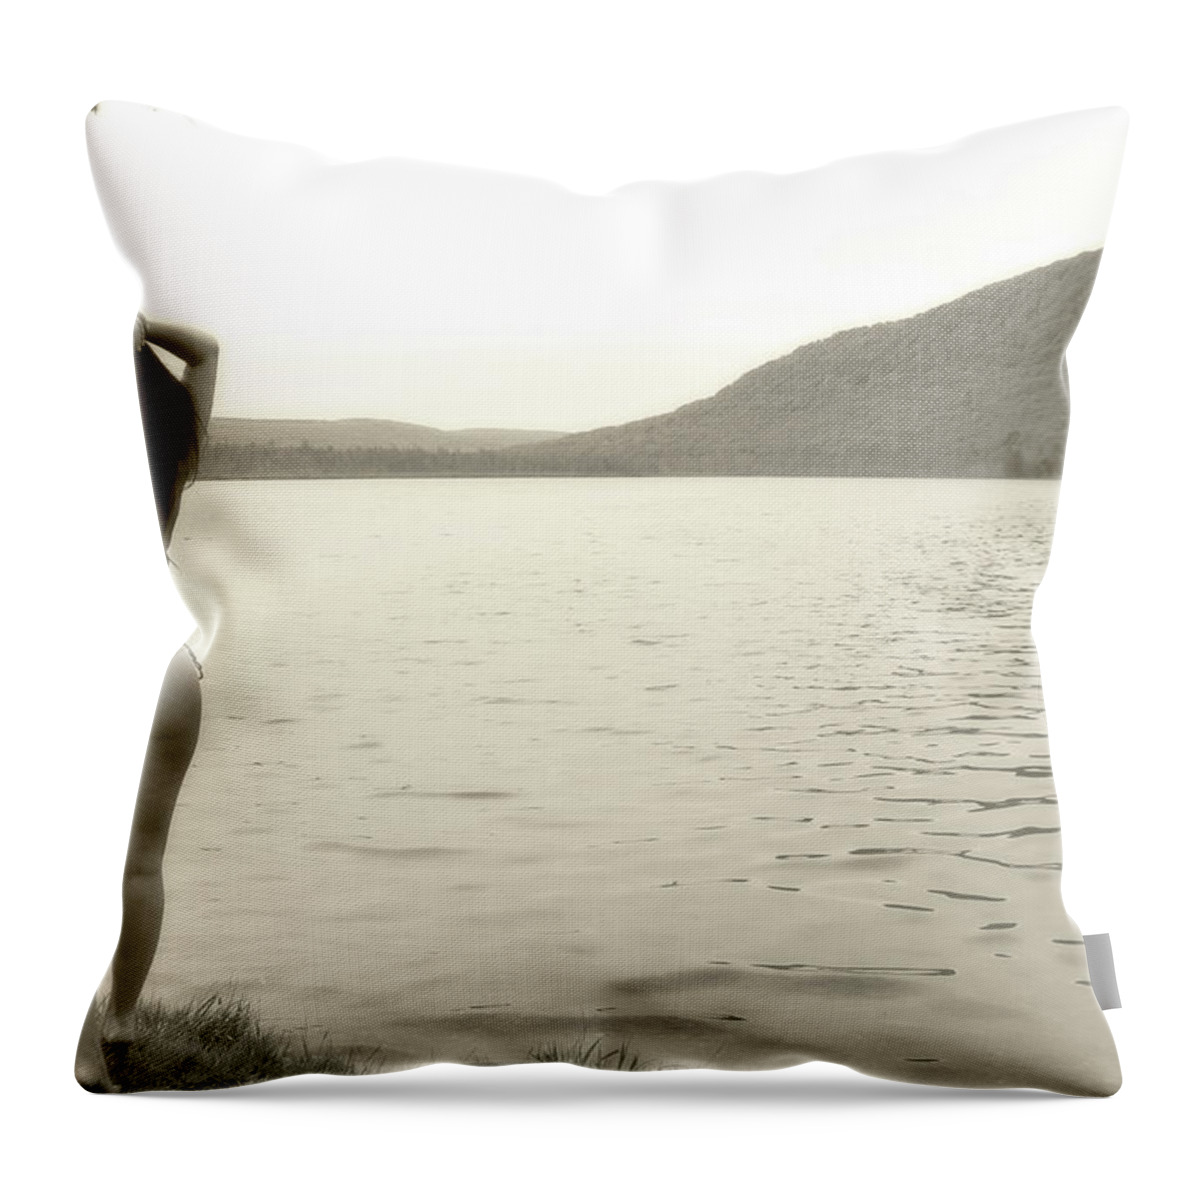 Pond Throw Pillow featuring the photograph Scenery by David Stasiak